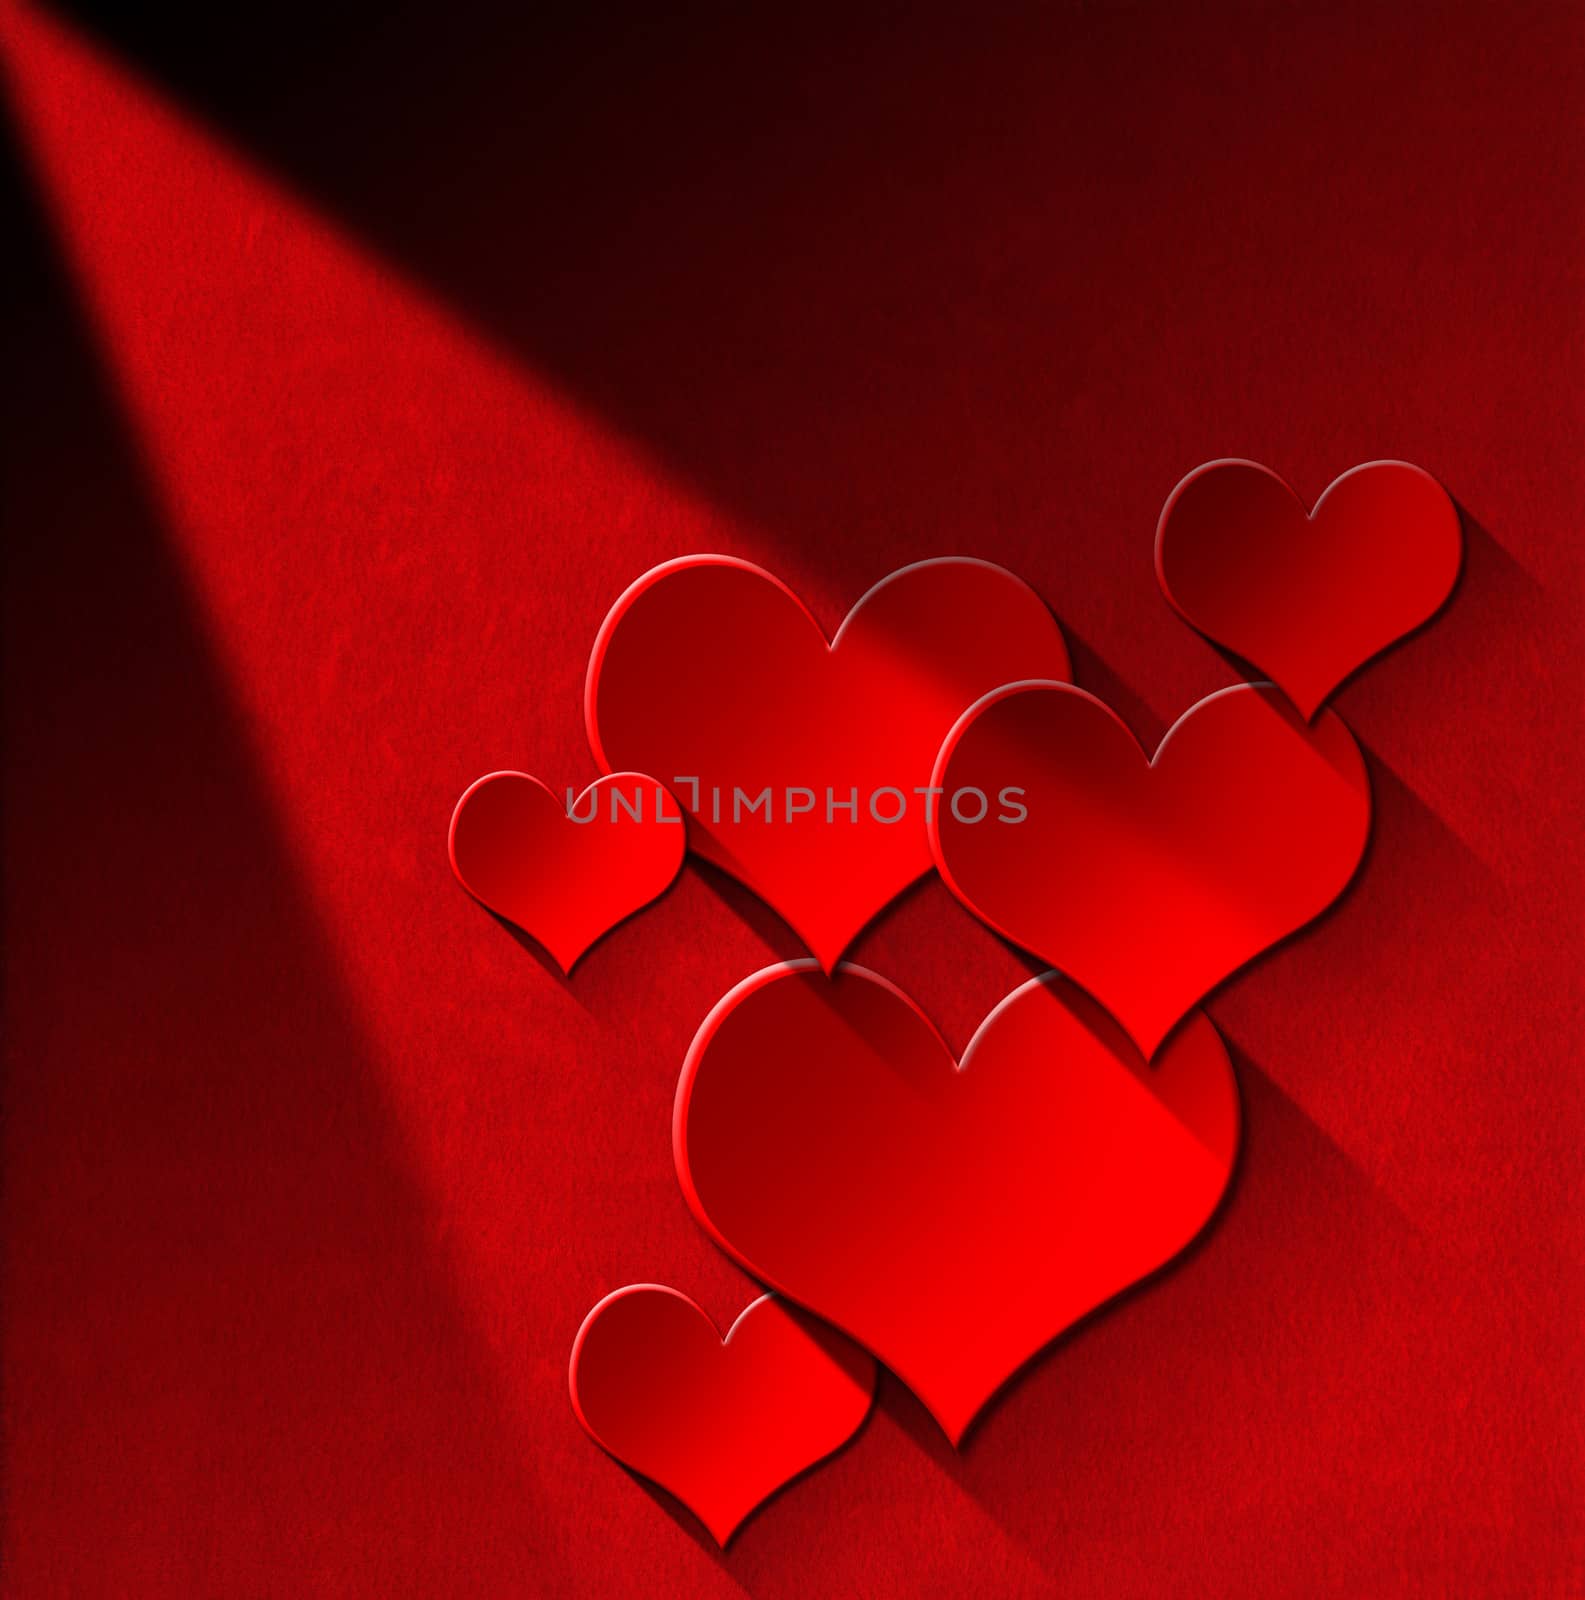 Many stylized red hearts on red velvet background with shadows